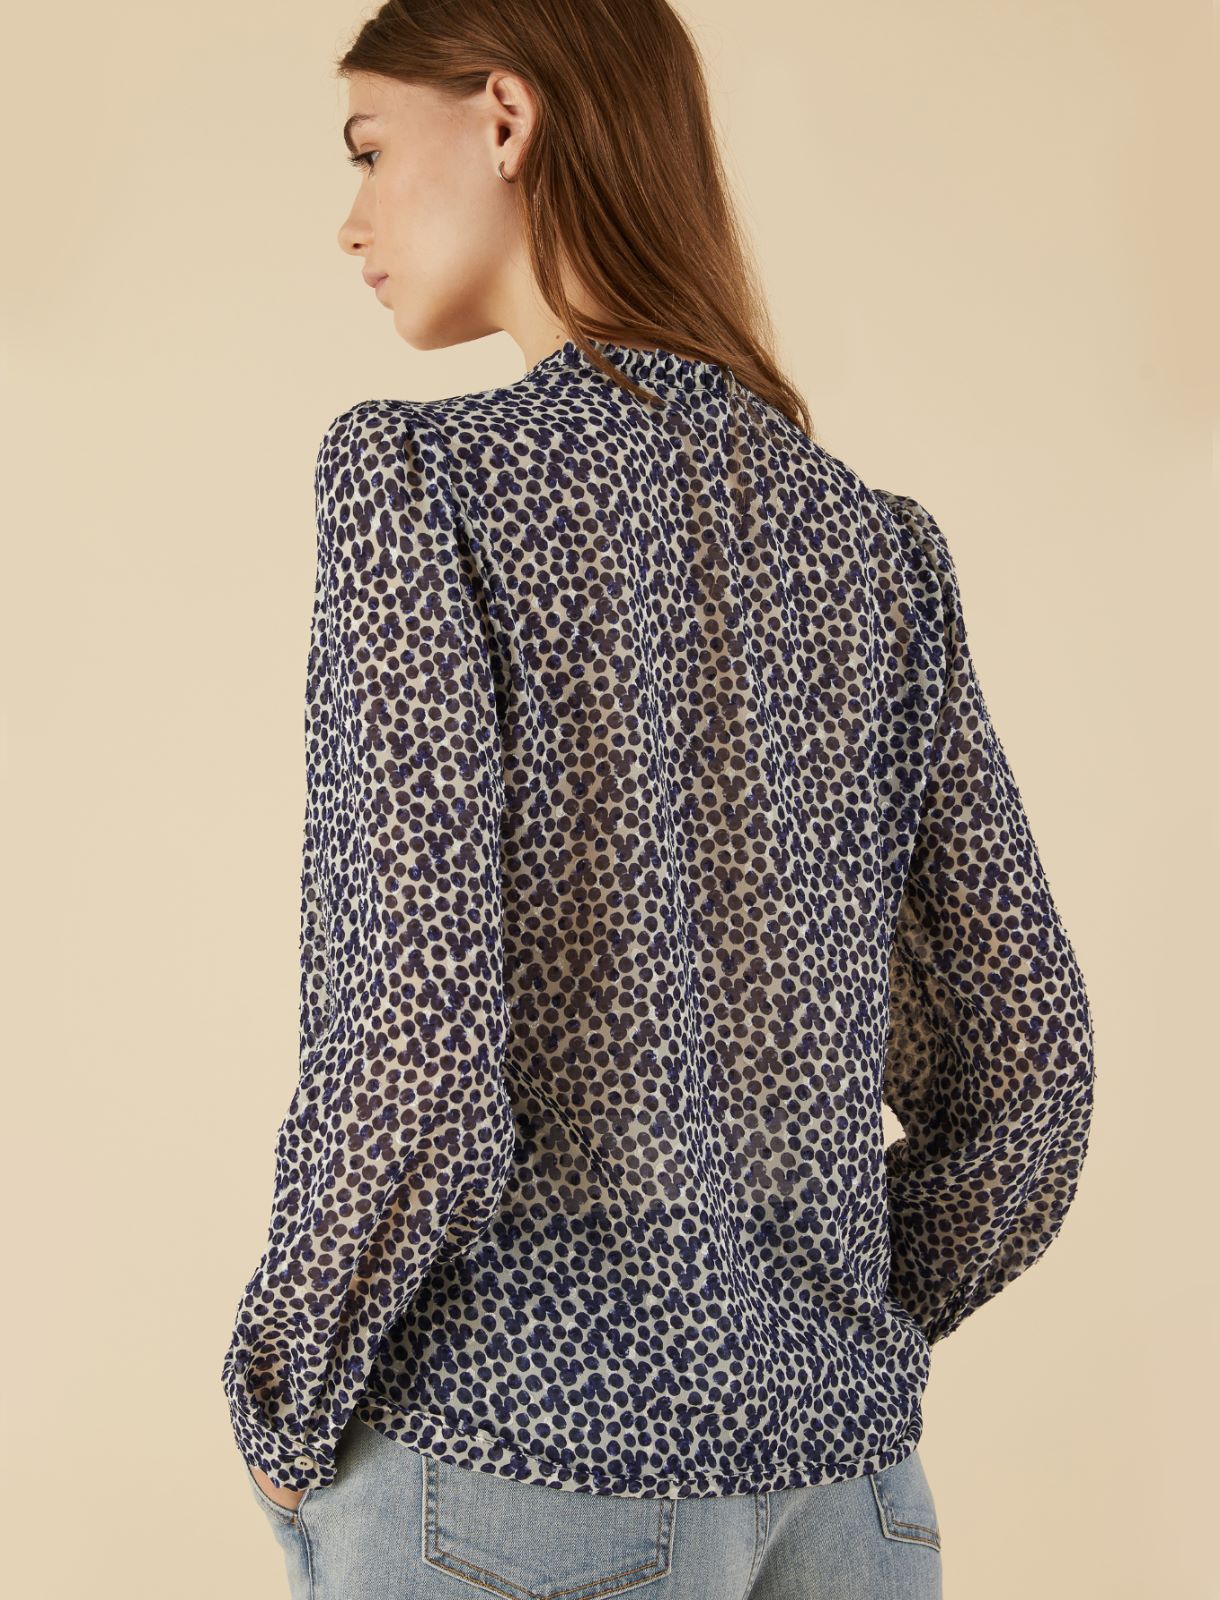 Dotted Swiss blouse - Navy - Marella - 3